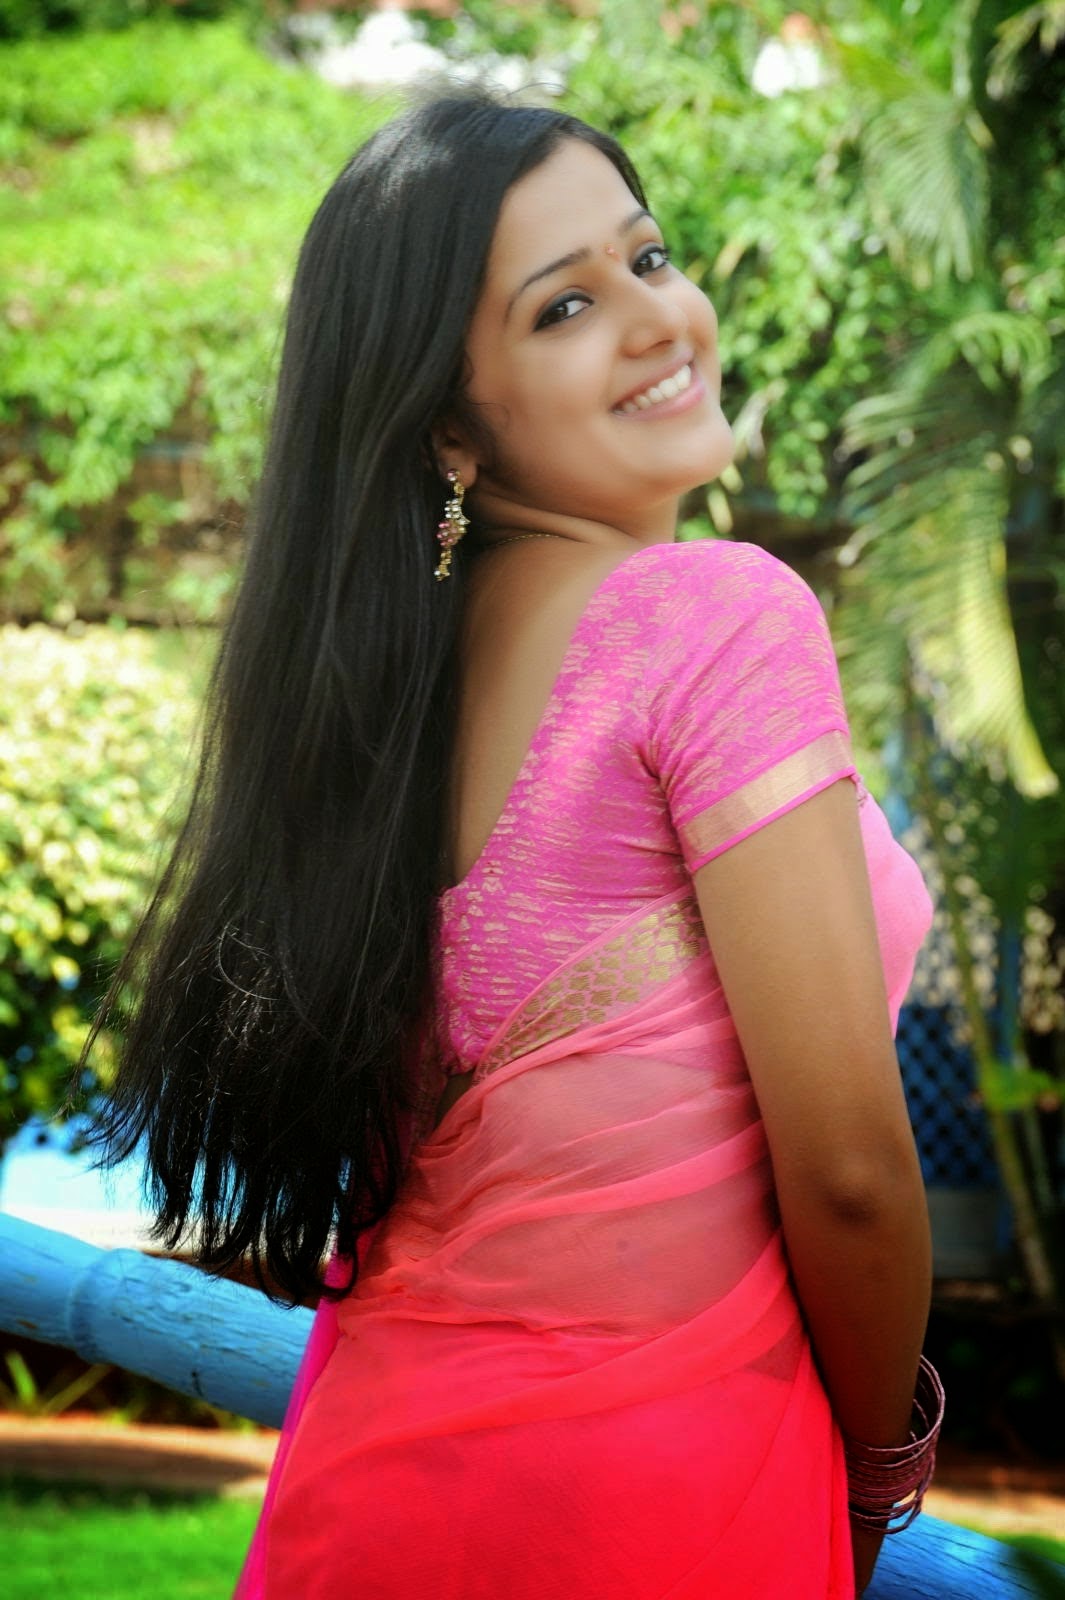 Samskruthy Shenoy Side View Photos In Pink Saree Samskruthy Shenoy Photos